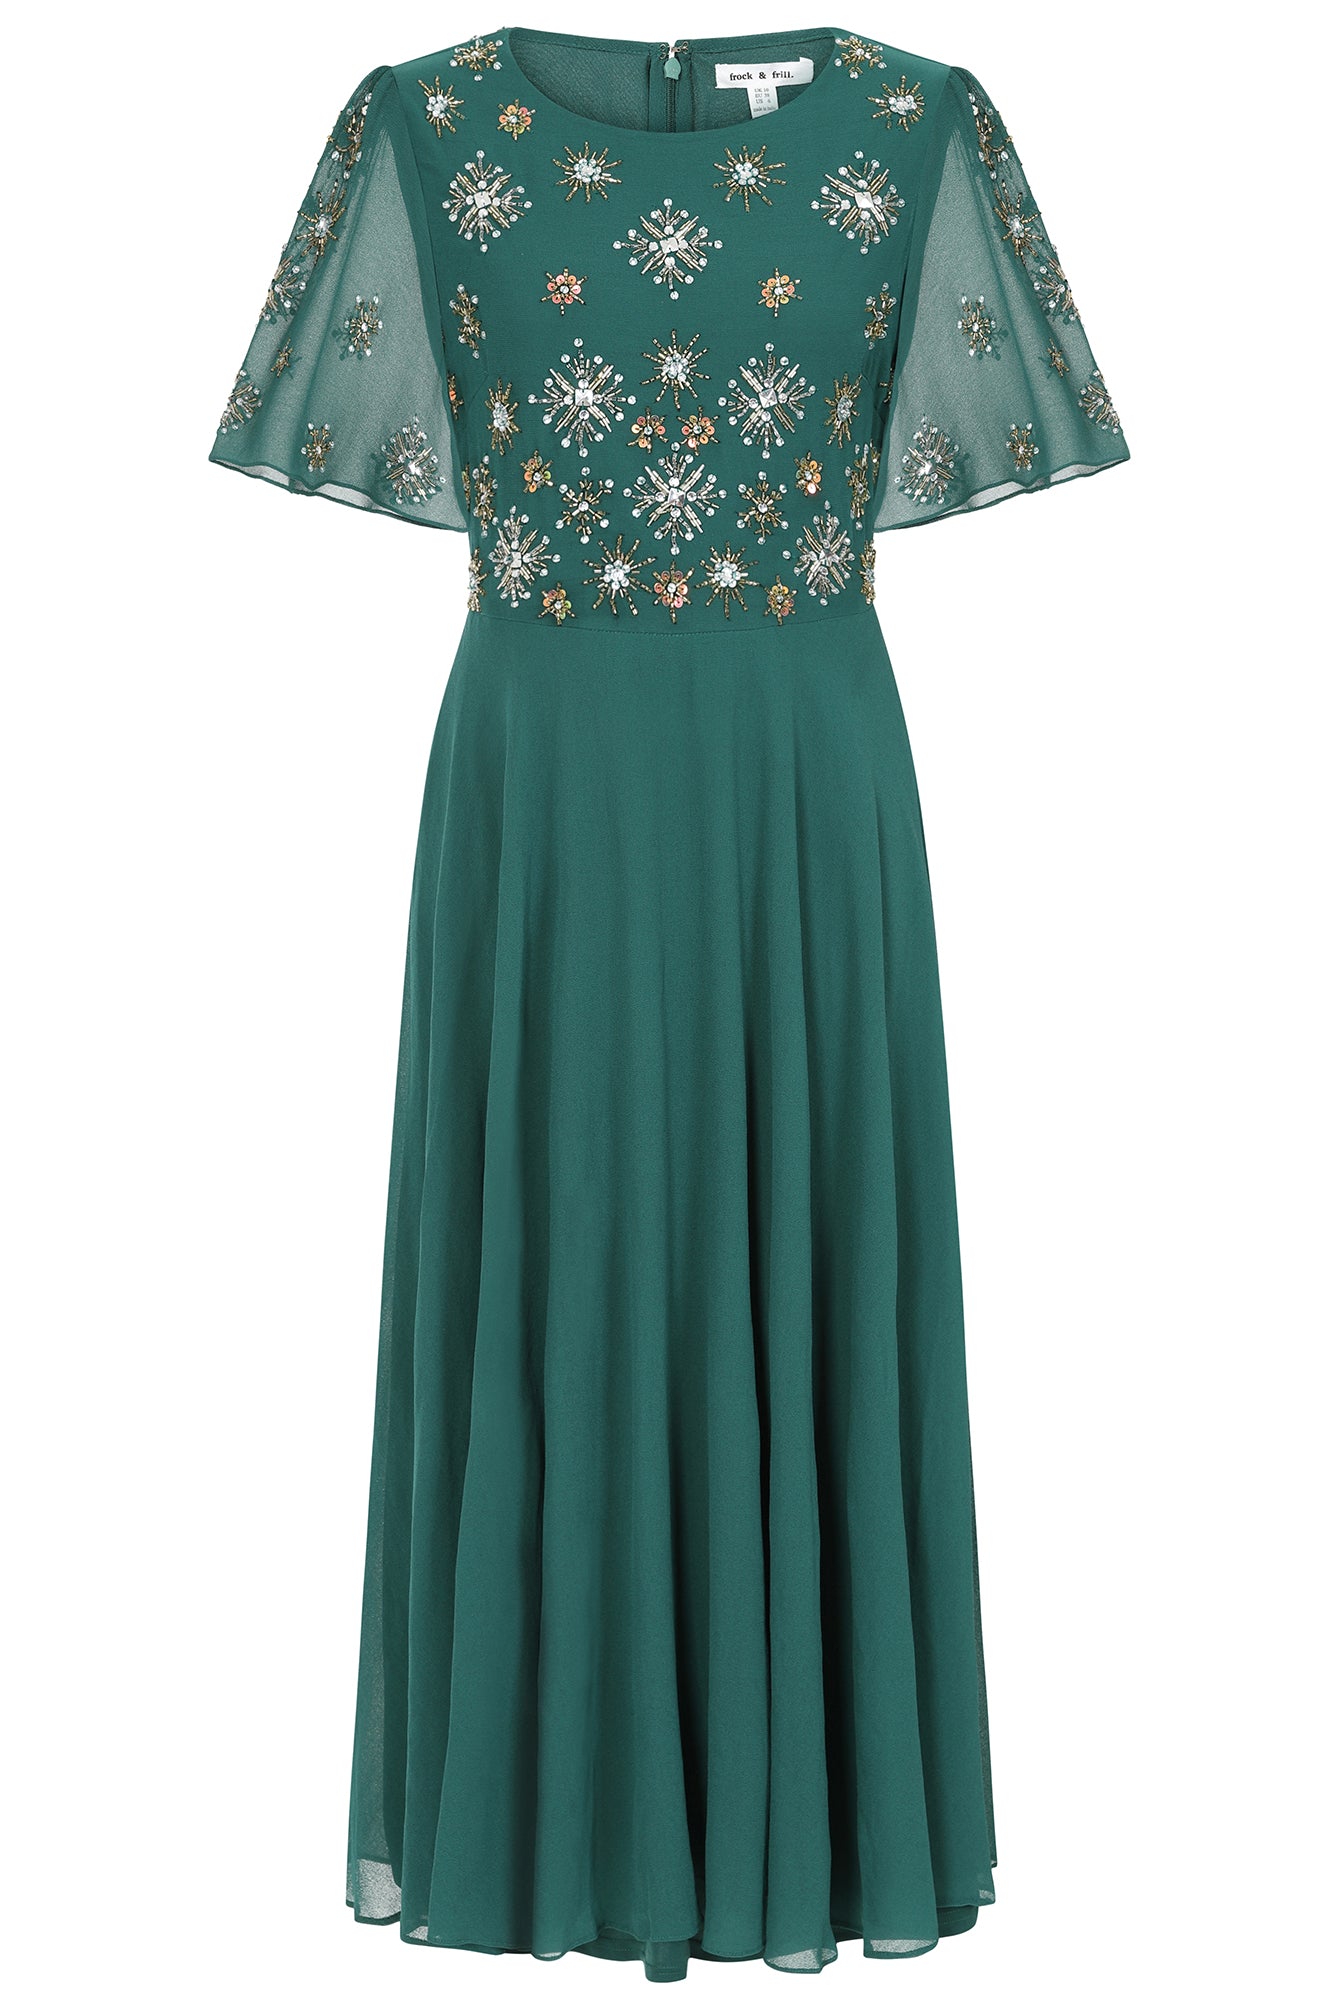 Women’s Kelby Embellished Midaxi Dress - Alpine Green Small Frock and Frill